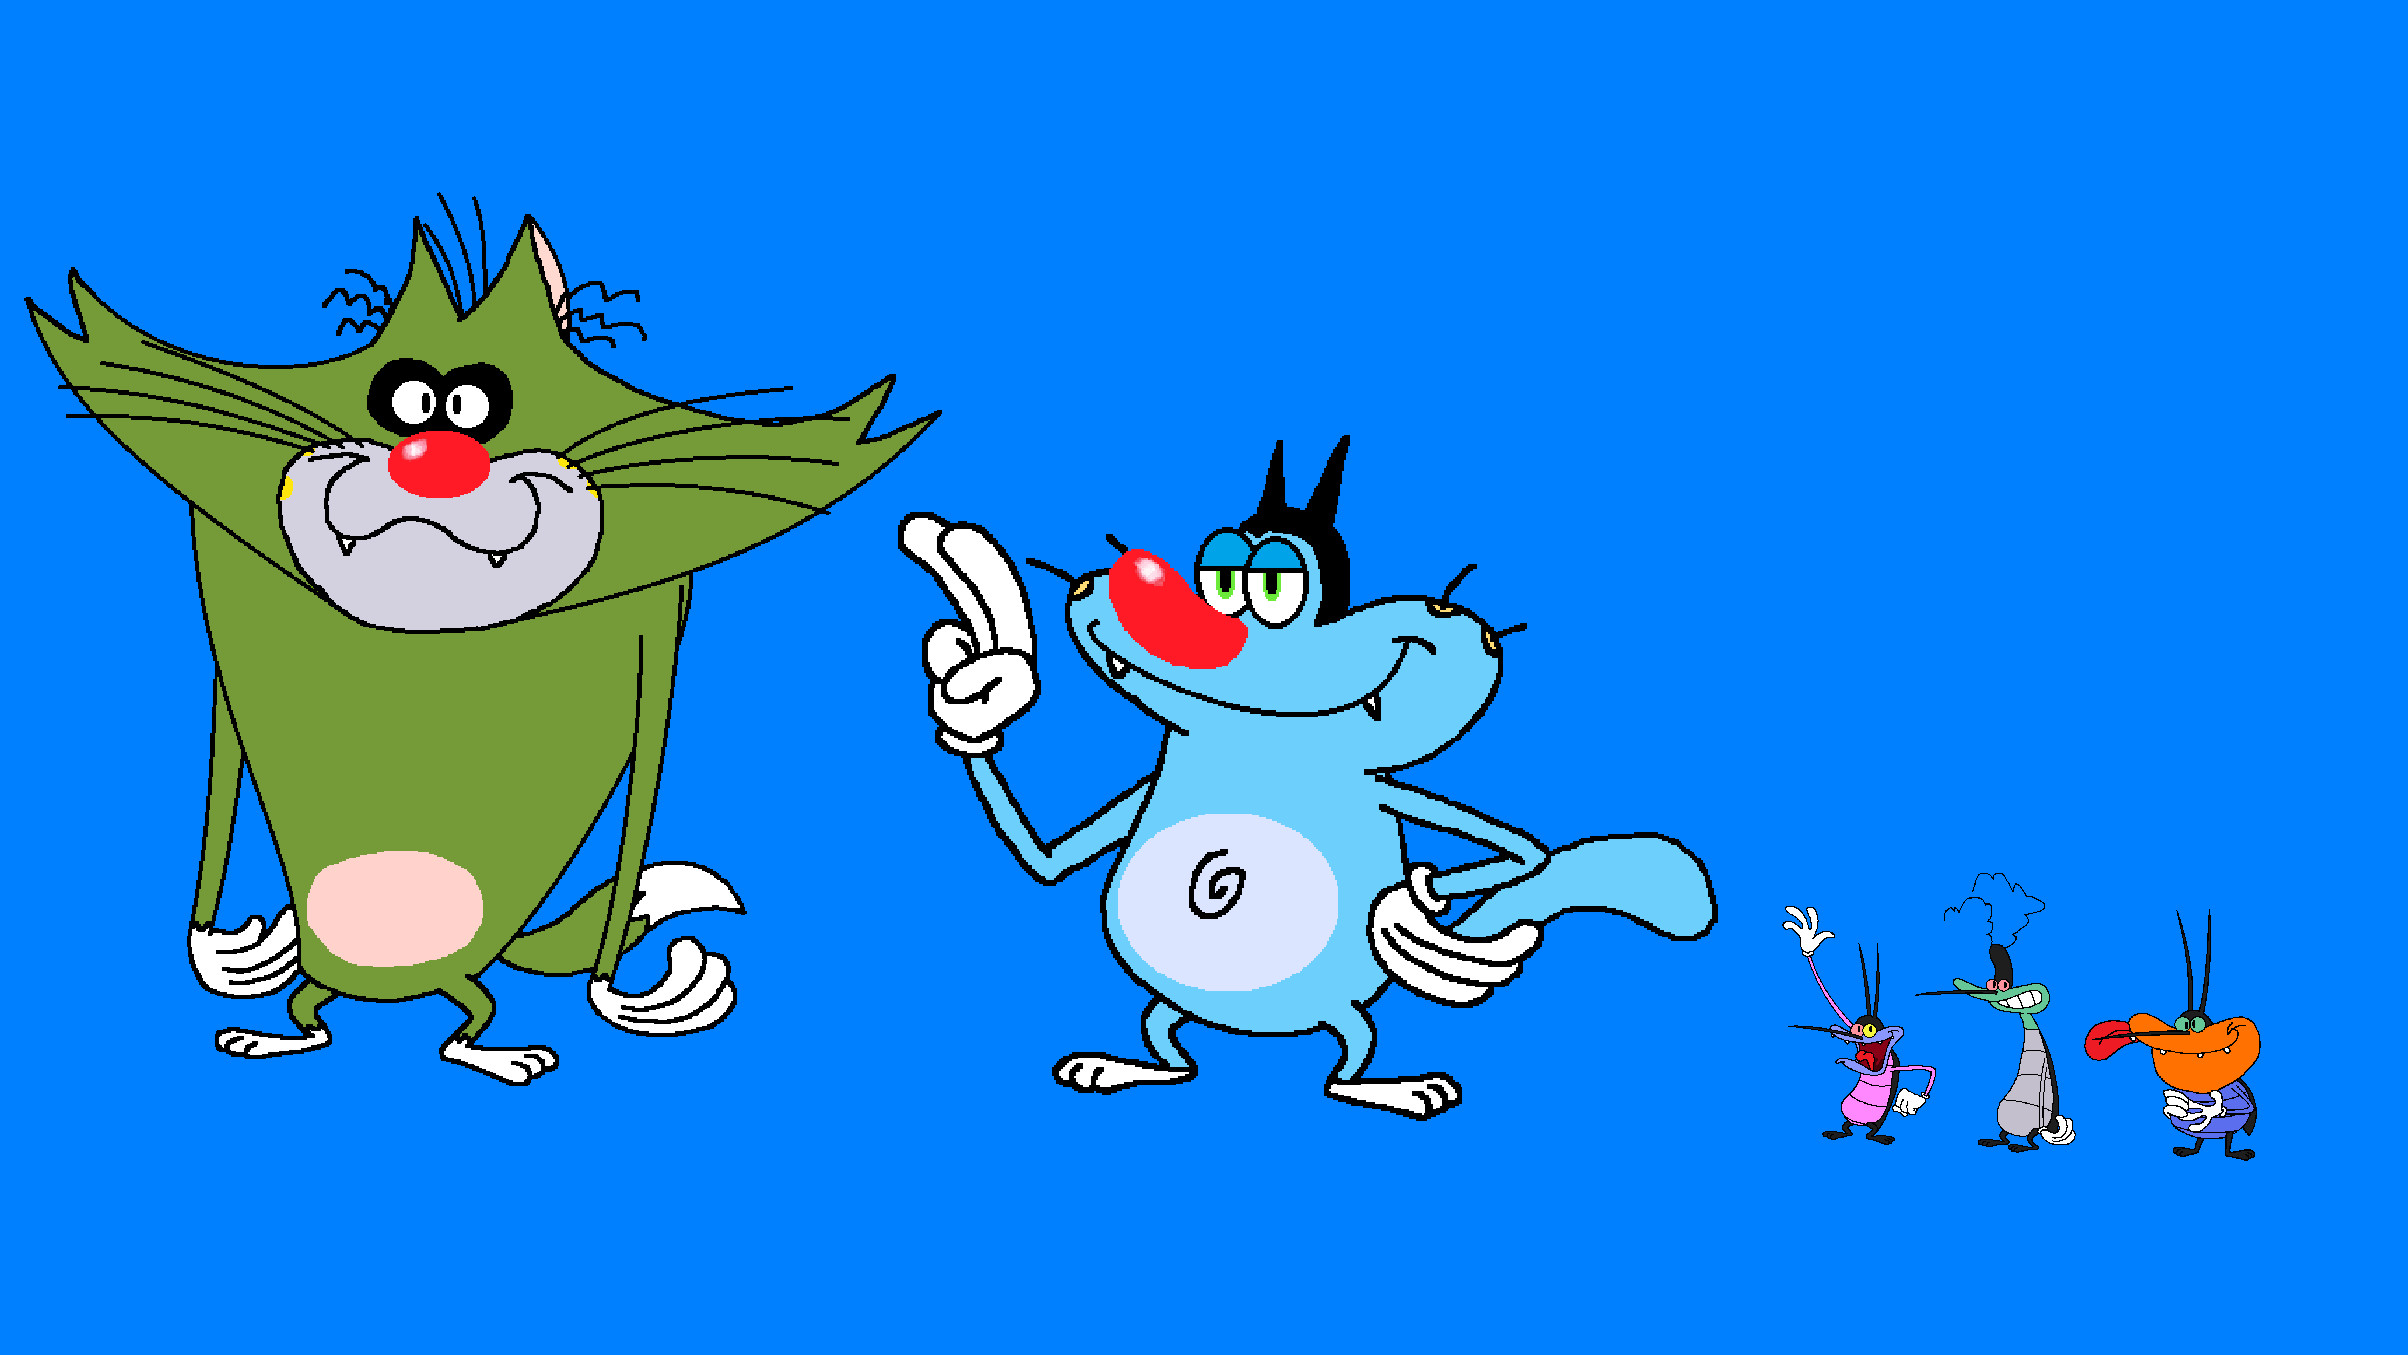 Oggy, Jack, and the Cockroaches by BlueCat98 on DeviantArt